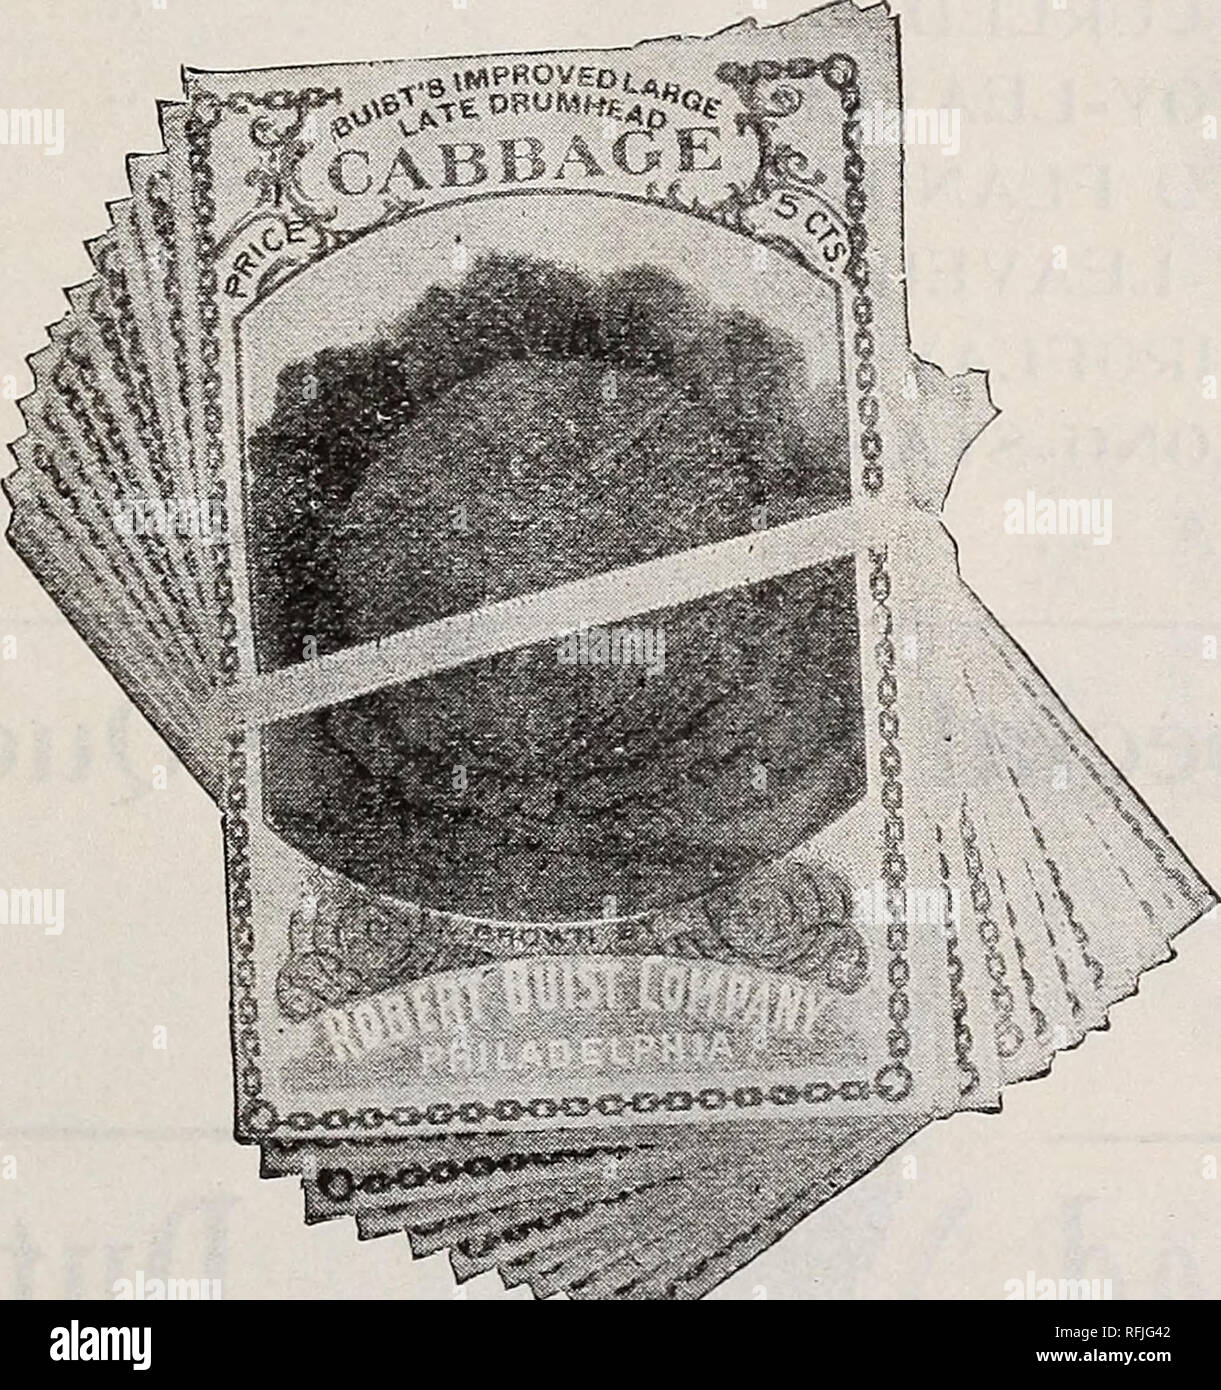 . Buist's prize medal turnip seeds : wholesale price list. Nurseries (Horticulture) Pennsylvania Philadelphia Catalogs; Vegetables Seeds Catalogs. SEEDS FOR SUMMER AND WINTER SOWING. 23 Buist's Garden Seeds IN PHCKETS The Grand Prize Hedal Brand &lt; o E C w E O u. Q z Q. a 73 &gt; H Z a o c &gt; r H m 75 &quot;0 c H a to H 73 O Z o Illustration of Buist's Pictorial Brand Packets. H 3 2 73 O 73 ffl &gt; H â n cn &gt; H C 73 m 53 H 3 2 73 PRICE FOR THE SMALL OR HALF SIZE PAPERS. For 1,000 Papers ........ at $10.00 For 3,000 Papers at 9.00 For 5,000 Papers . at 8.00 For 10,000 Papers â¢ at 7.00  Stock Photo